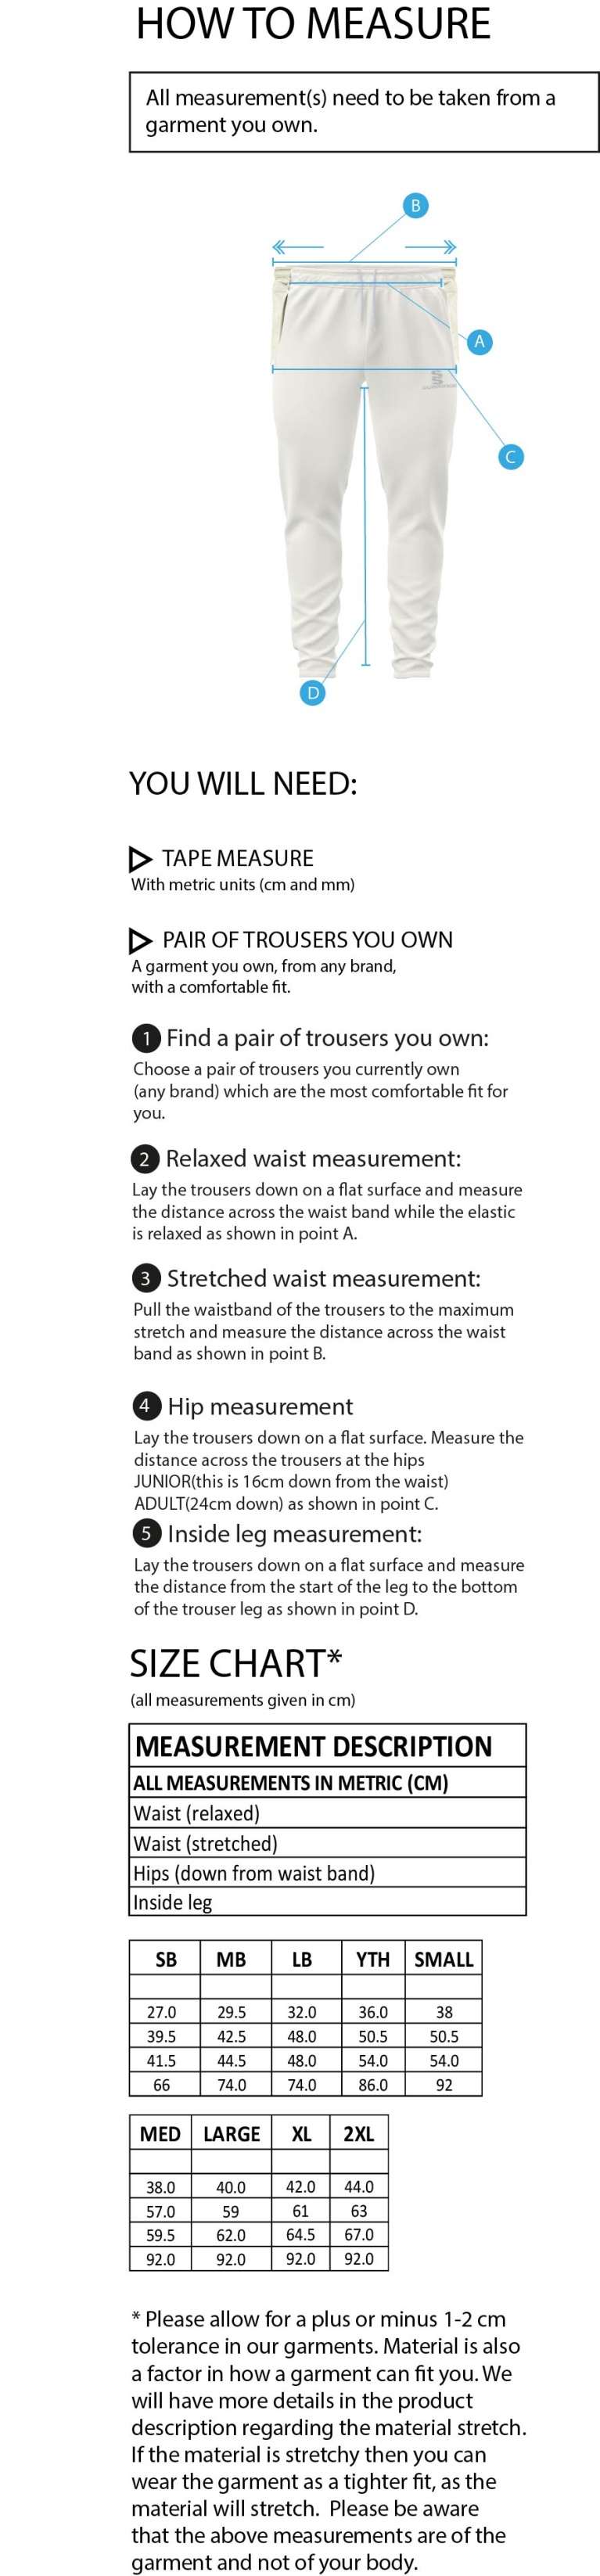 Hornchurch Athletic CC - Tek Playing Pants - Size Guide